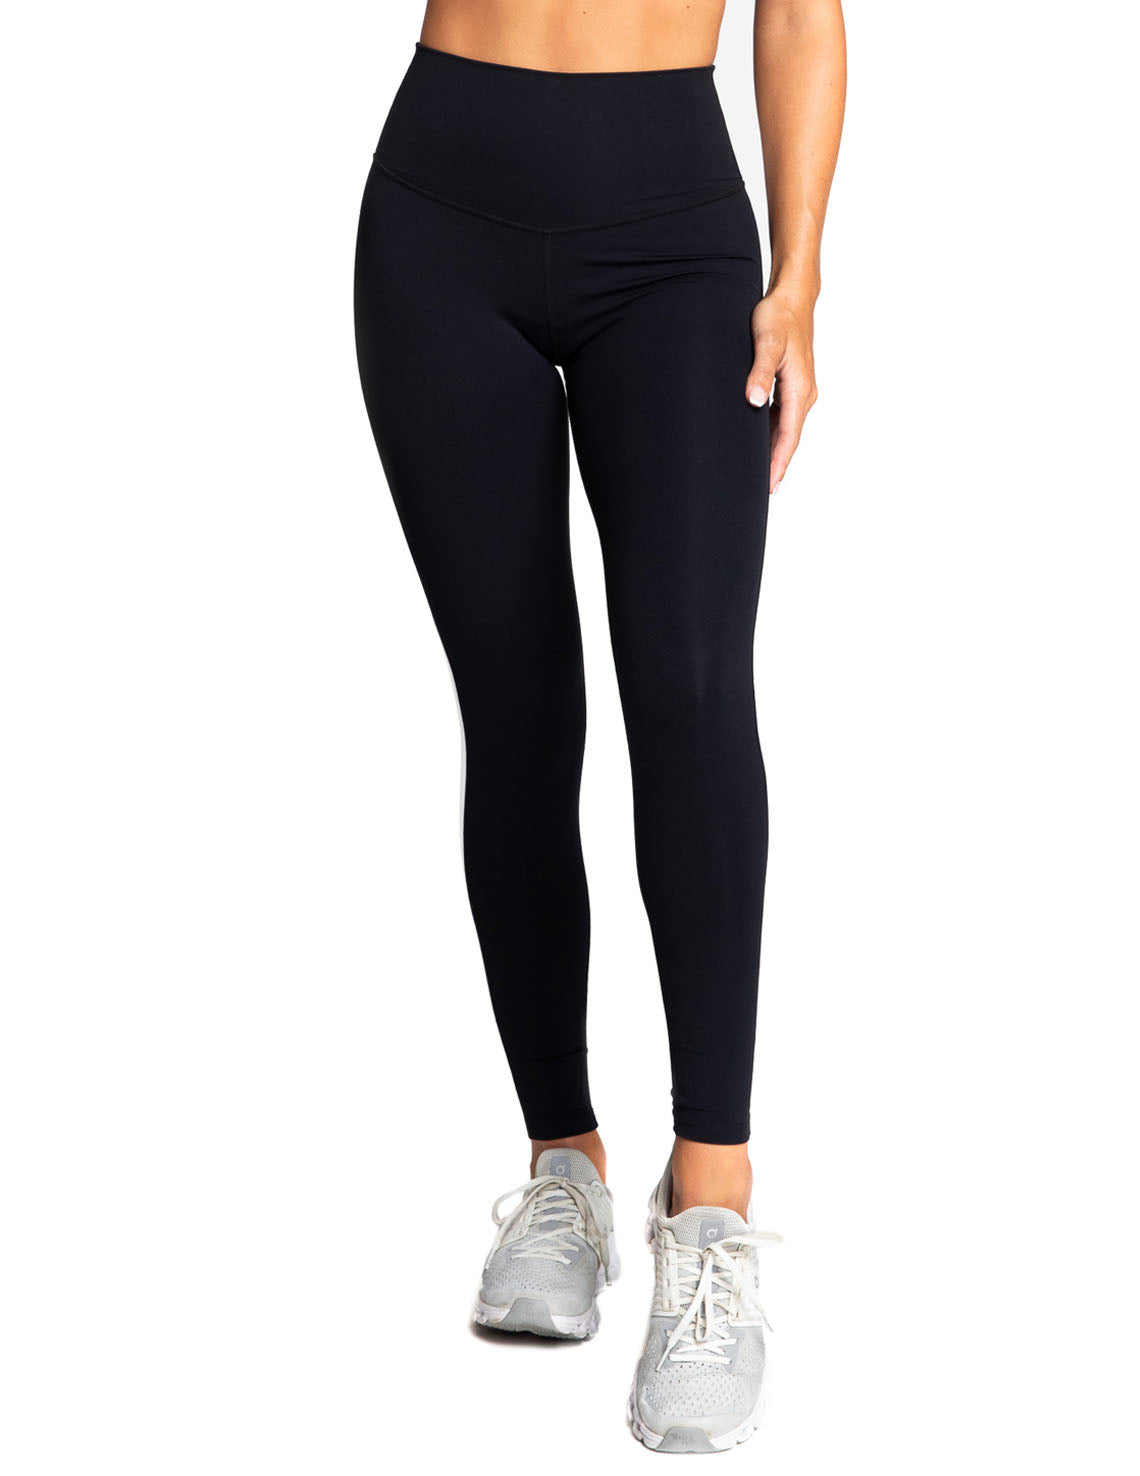 South Beach Plus high rise leggings with contrast ankle stripe in